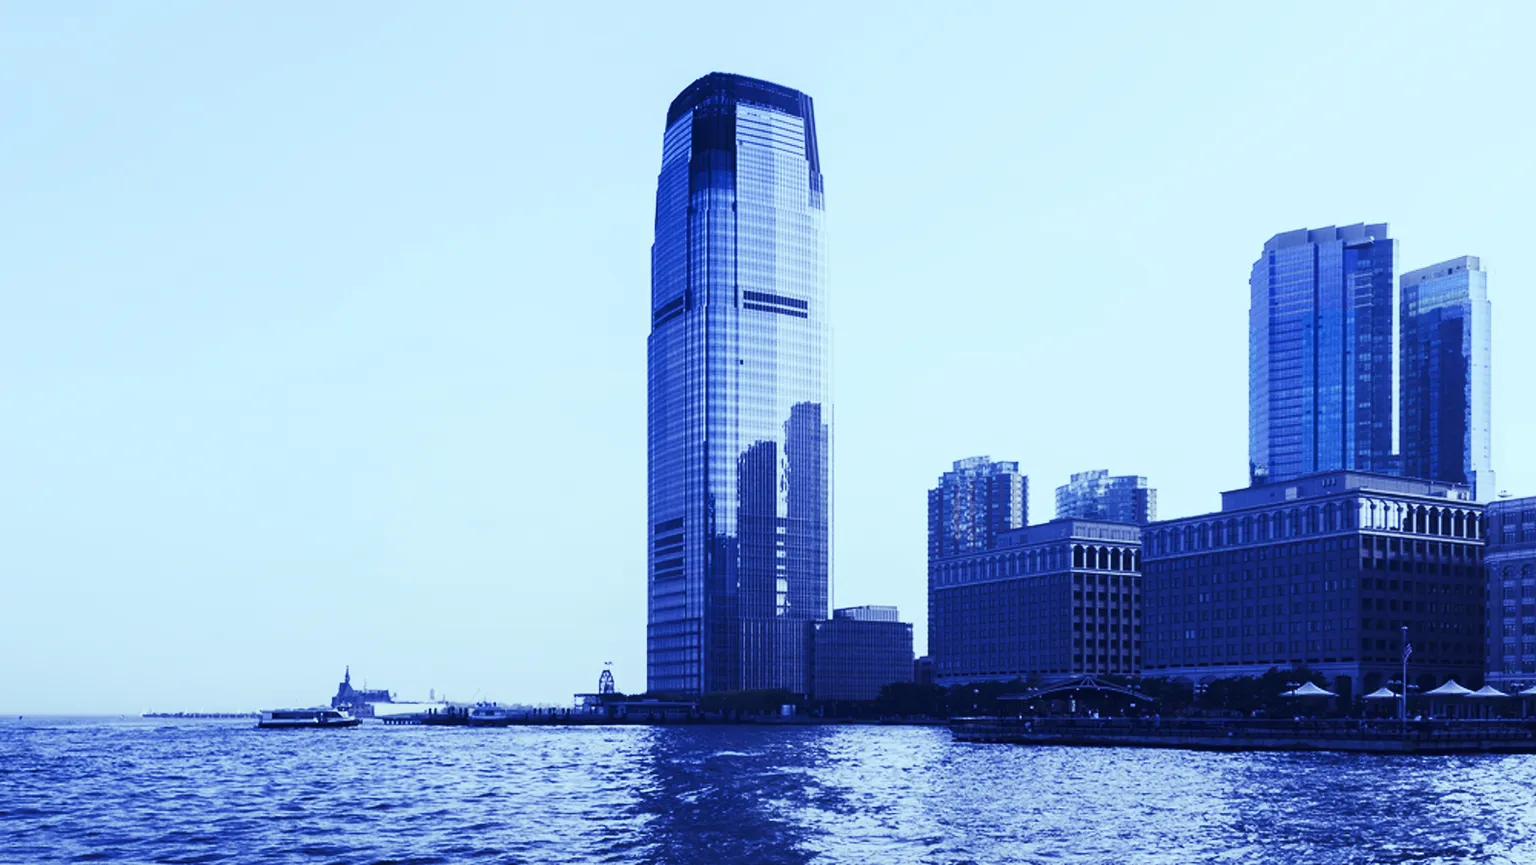 Goldman Sachs HQ  contemplates the week's news by staring longingly out to sea. PHOTO CREDIT: Shutterstock 